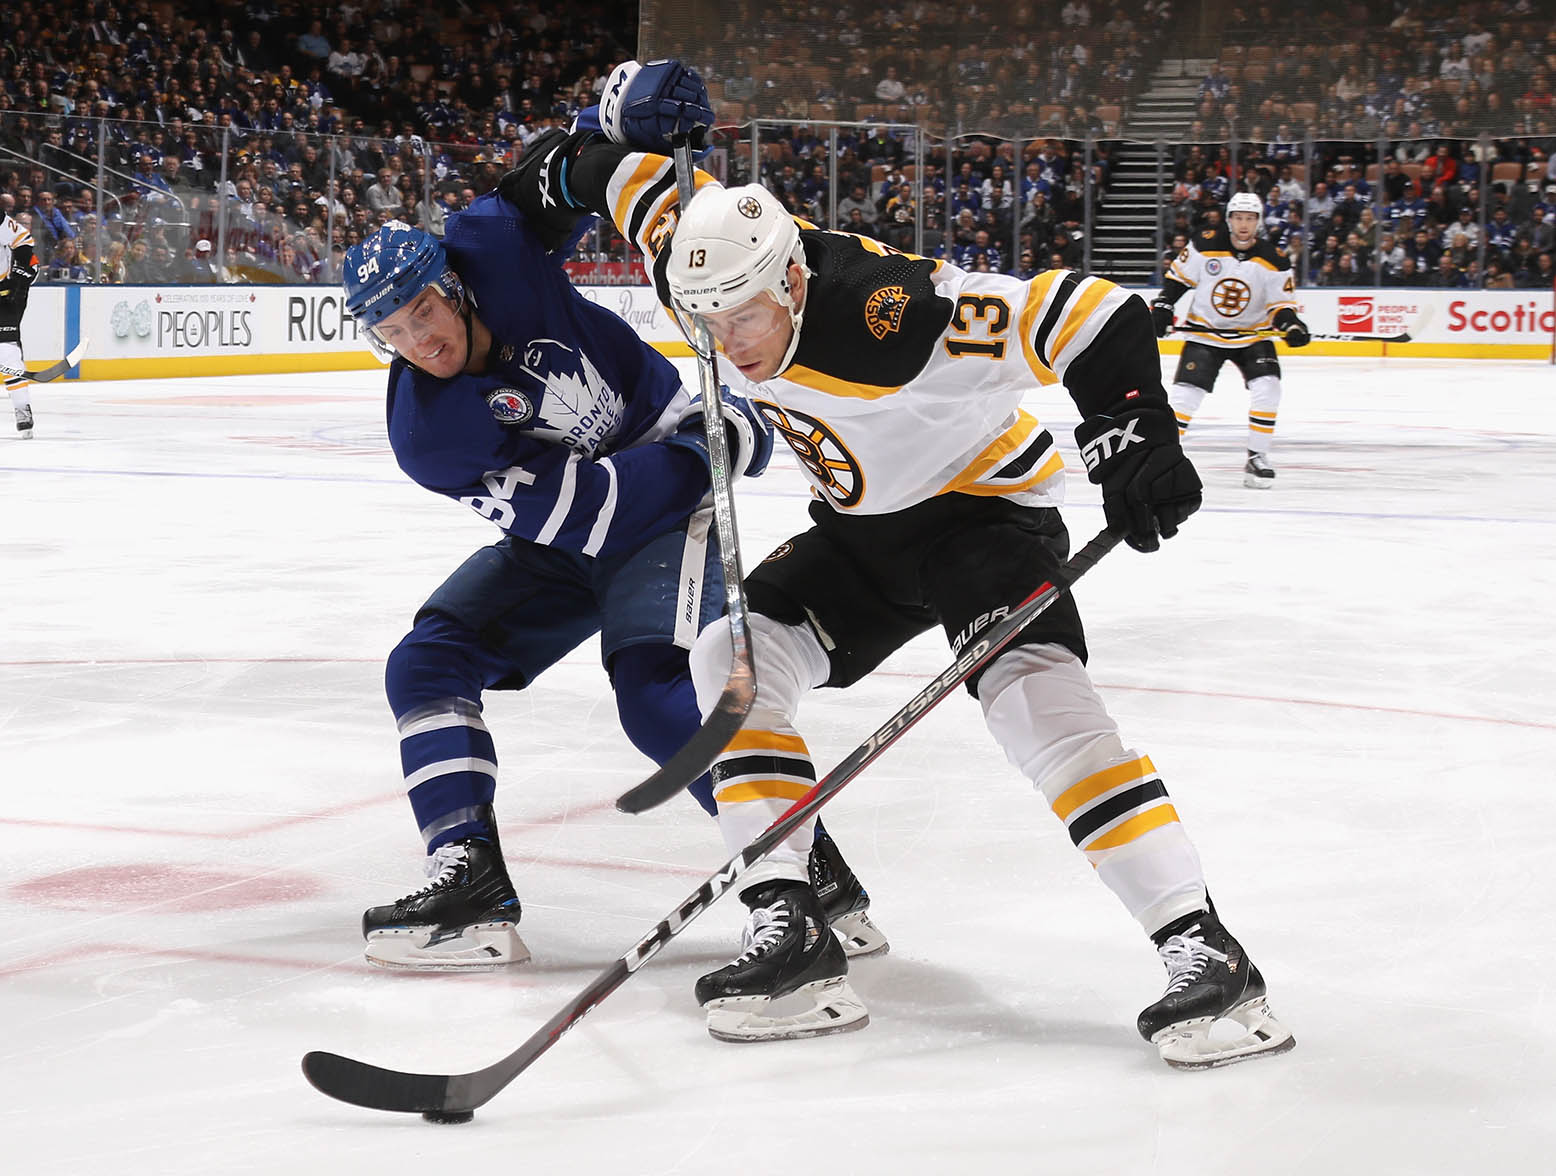 TORONTO, ONTARIO - NOVEMBER 15: Charlie Coyle #13 of the Boston Bruins attempts to get around Tyson Barrie #94 of the Toronto Maple Leafs during the first period at the Scotiabank Arena on November 15, 2019 in Toronto, Ontario, Canada. (Photo by Bruce Bennett/Getty Images)